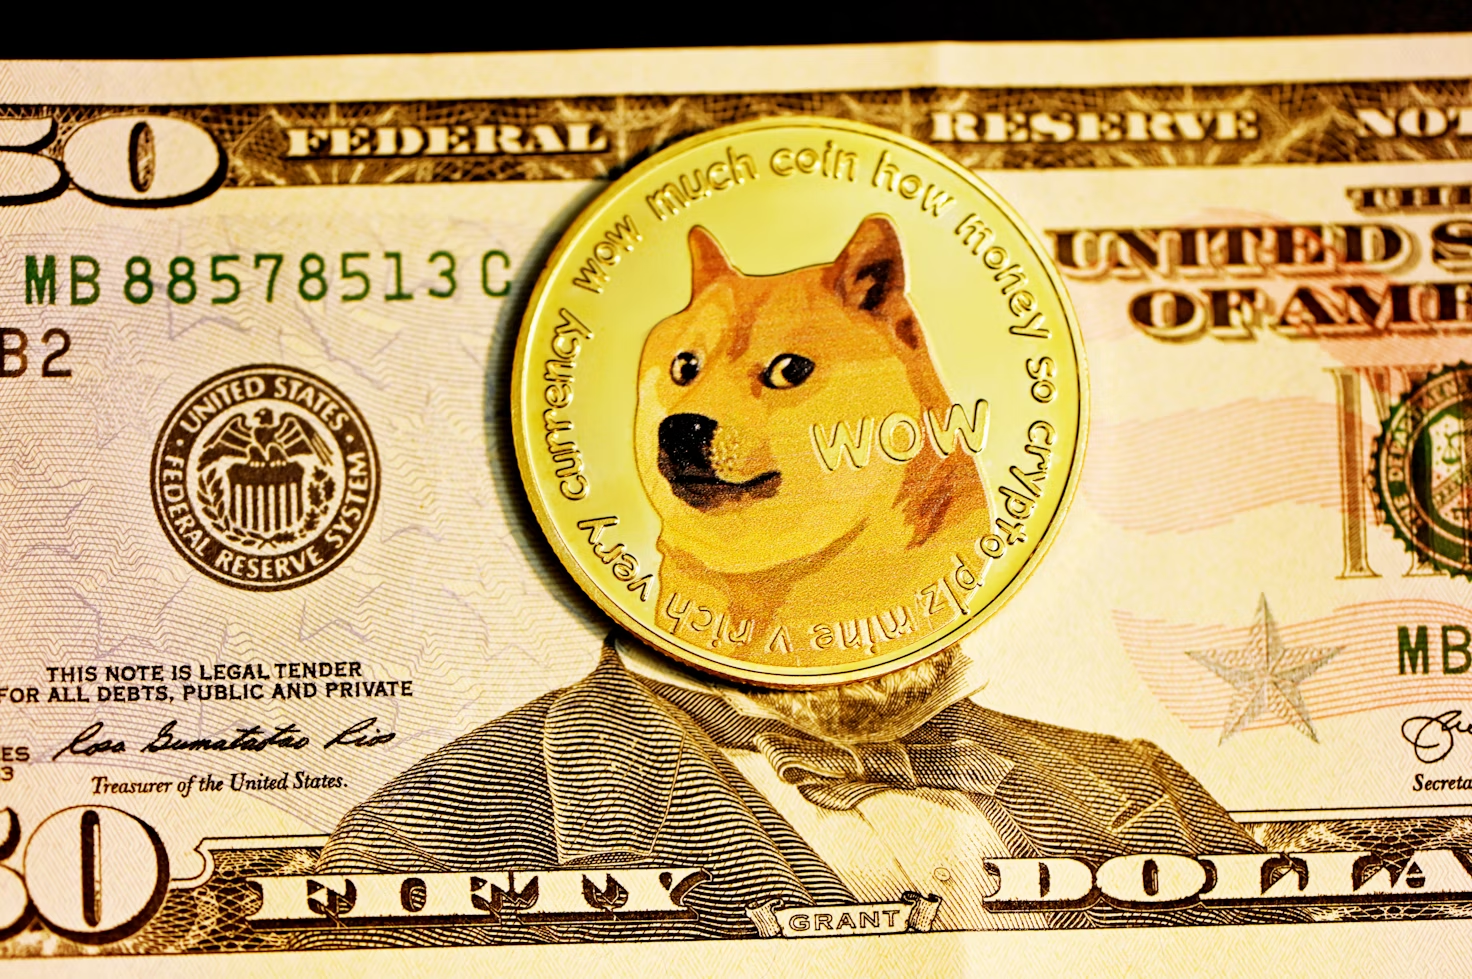 MoonBag, The Rising Star in Top Crypto Presales Outshining SHIB and DOGE = The Bit Journal